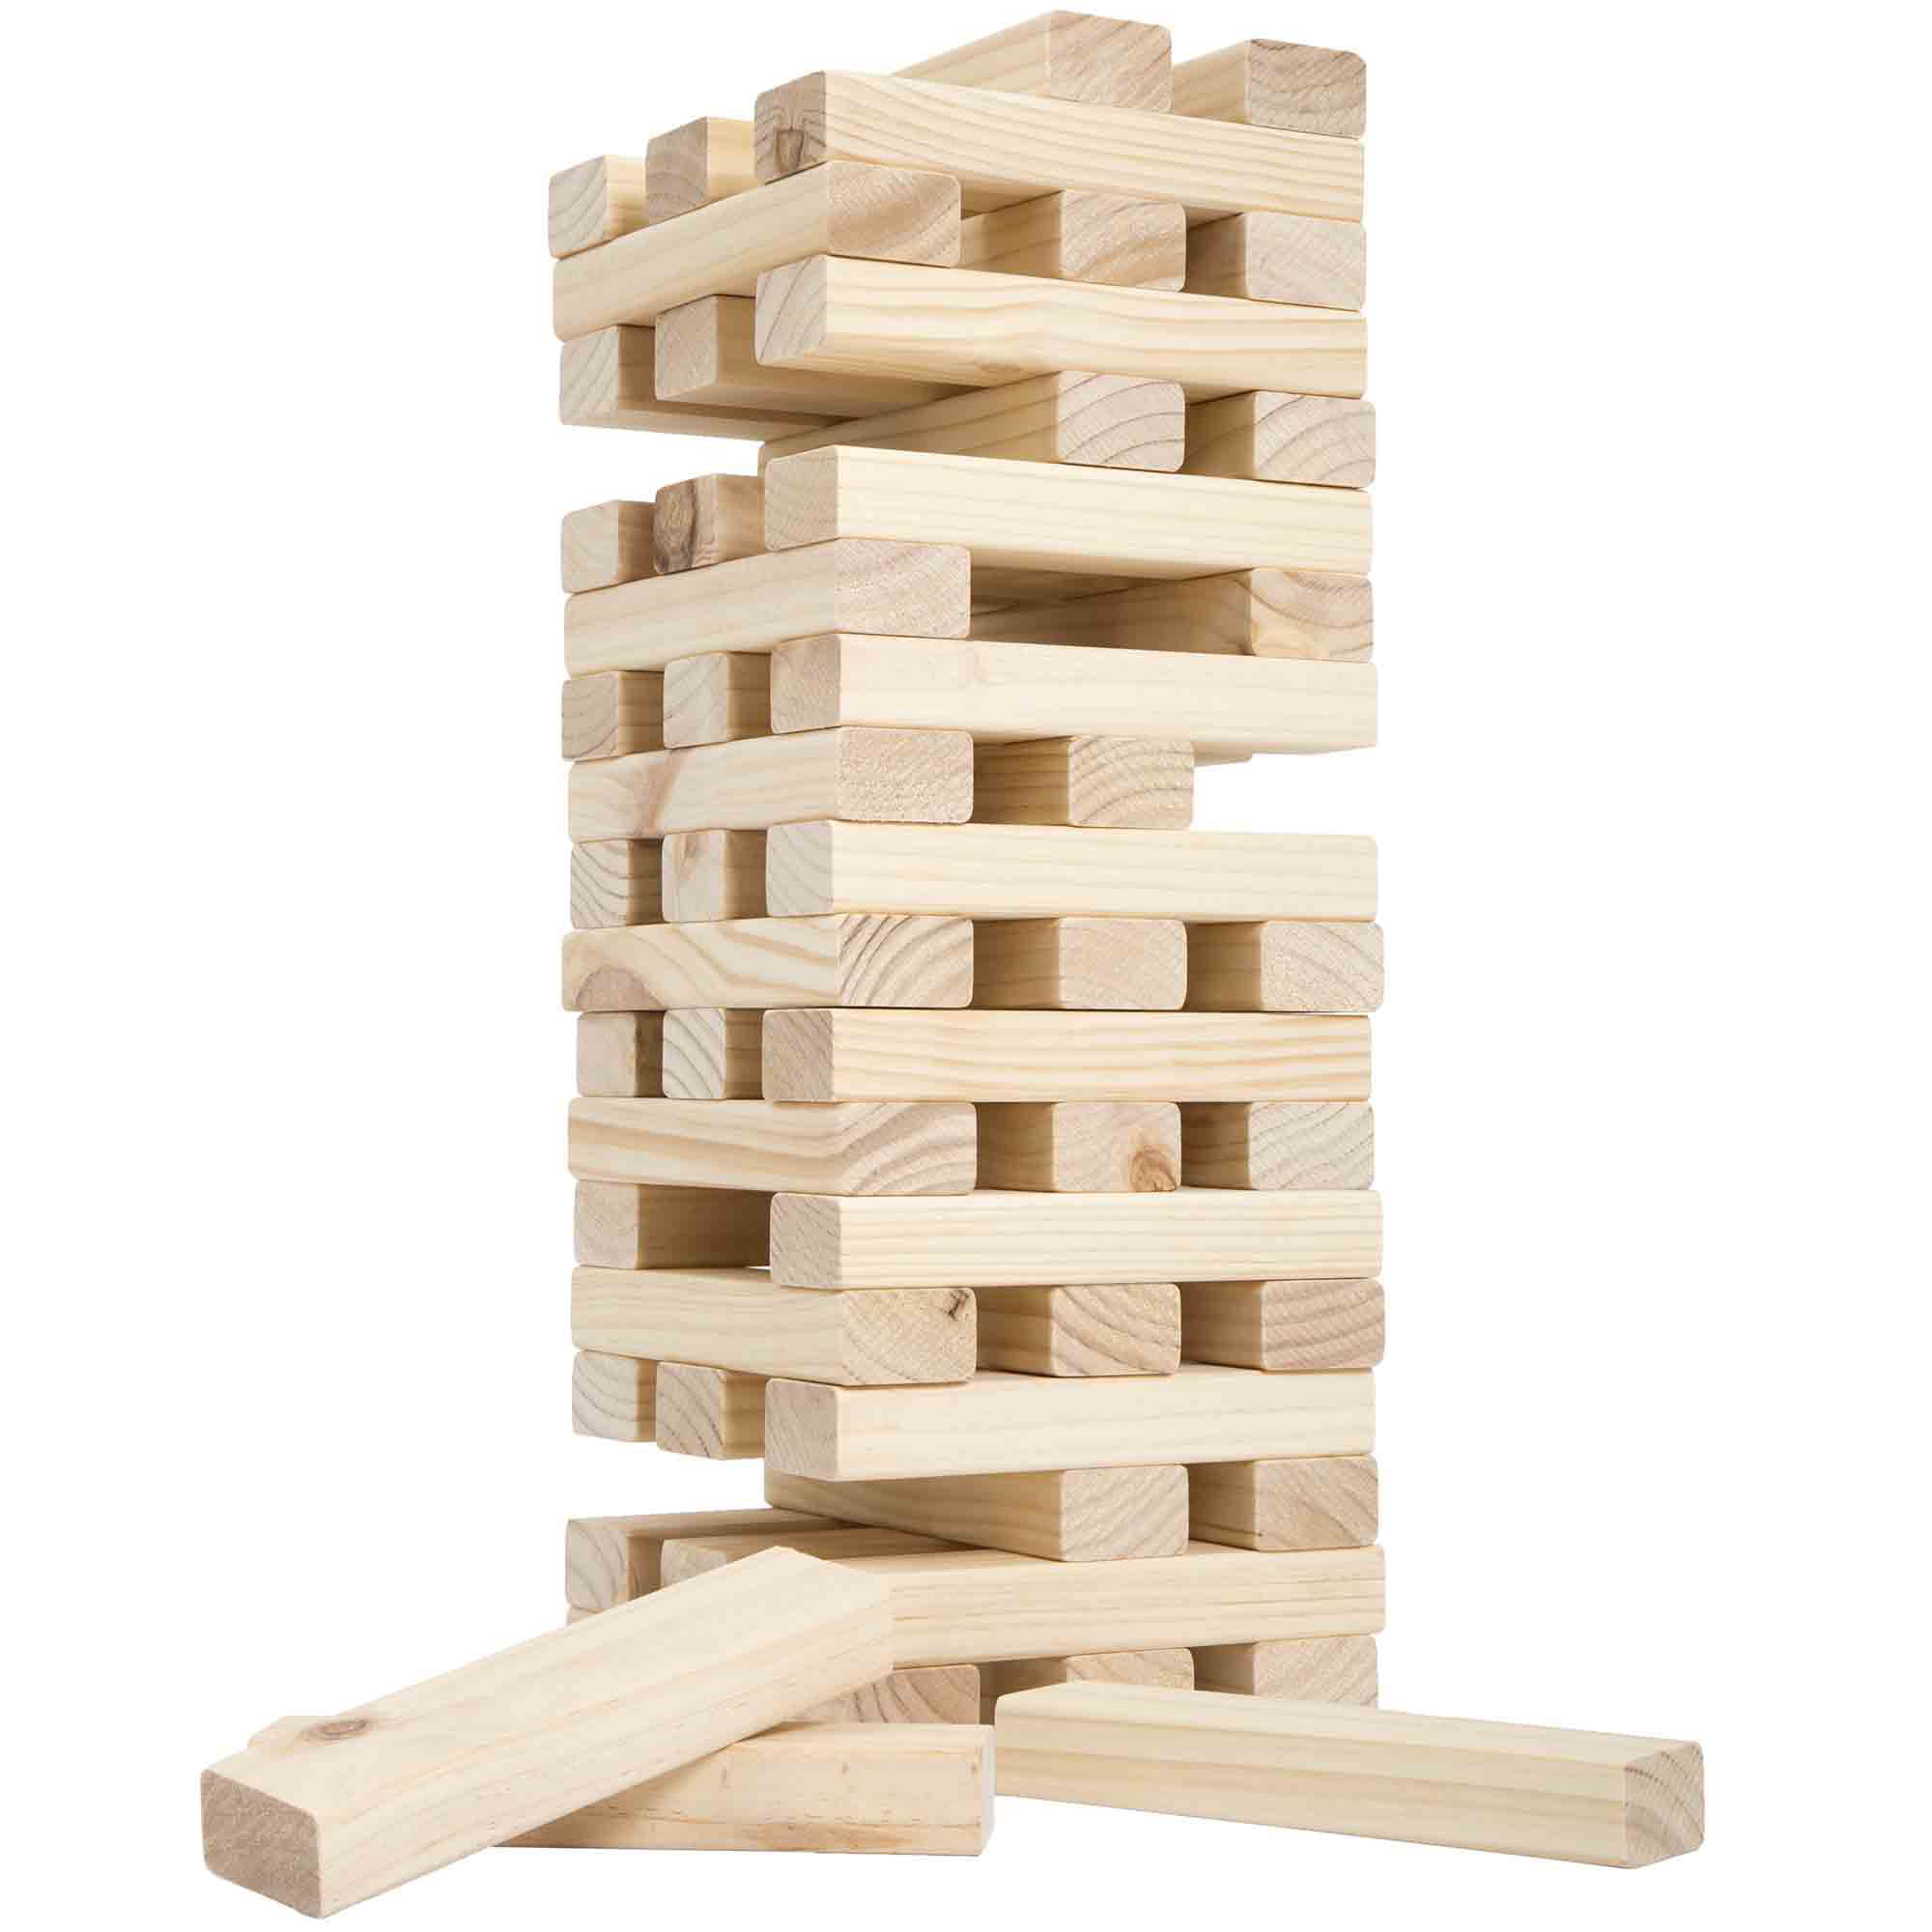 5 CHOICES OF TUMBLING TOWER WOODEN STACKING BLOCK TOWER CLASSIC FAMILY FUN GAME 